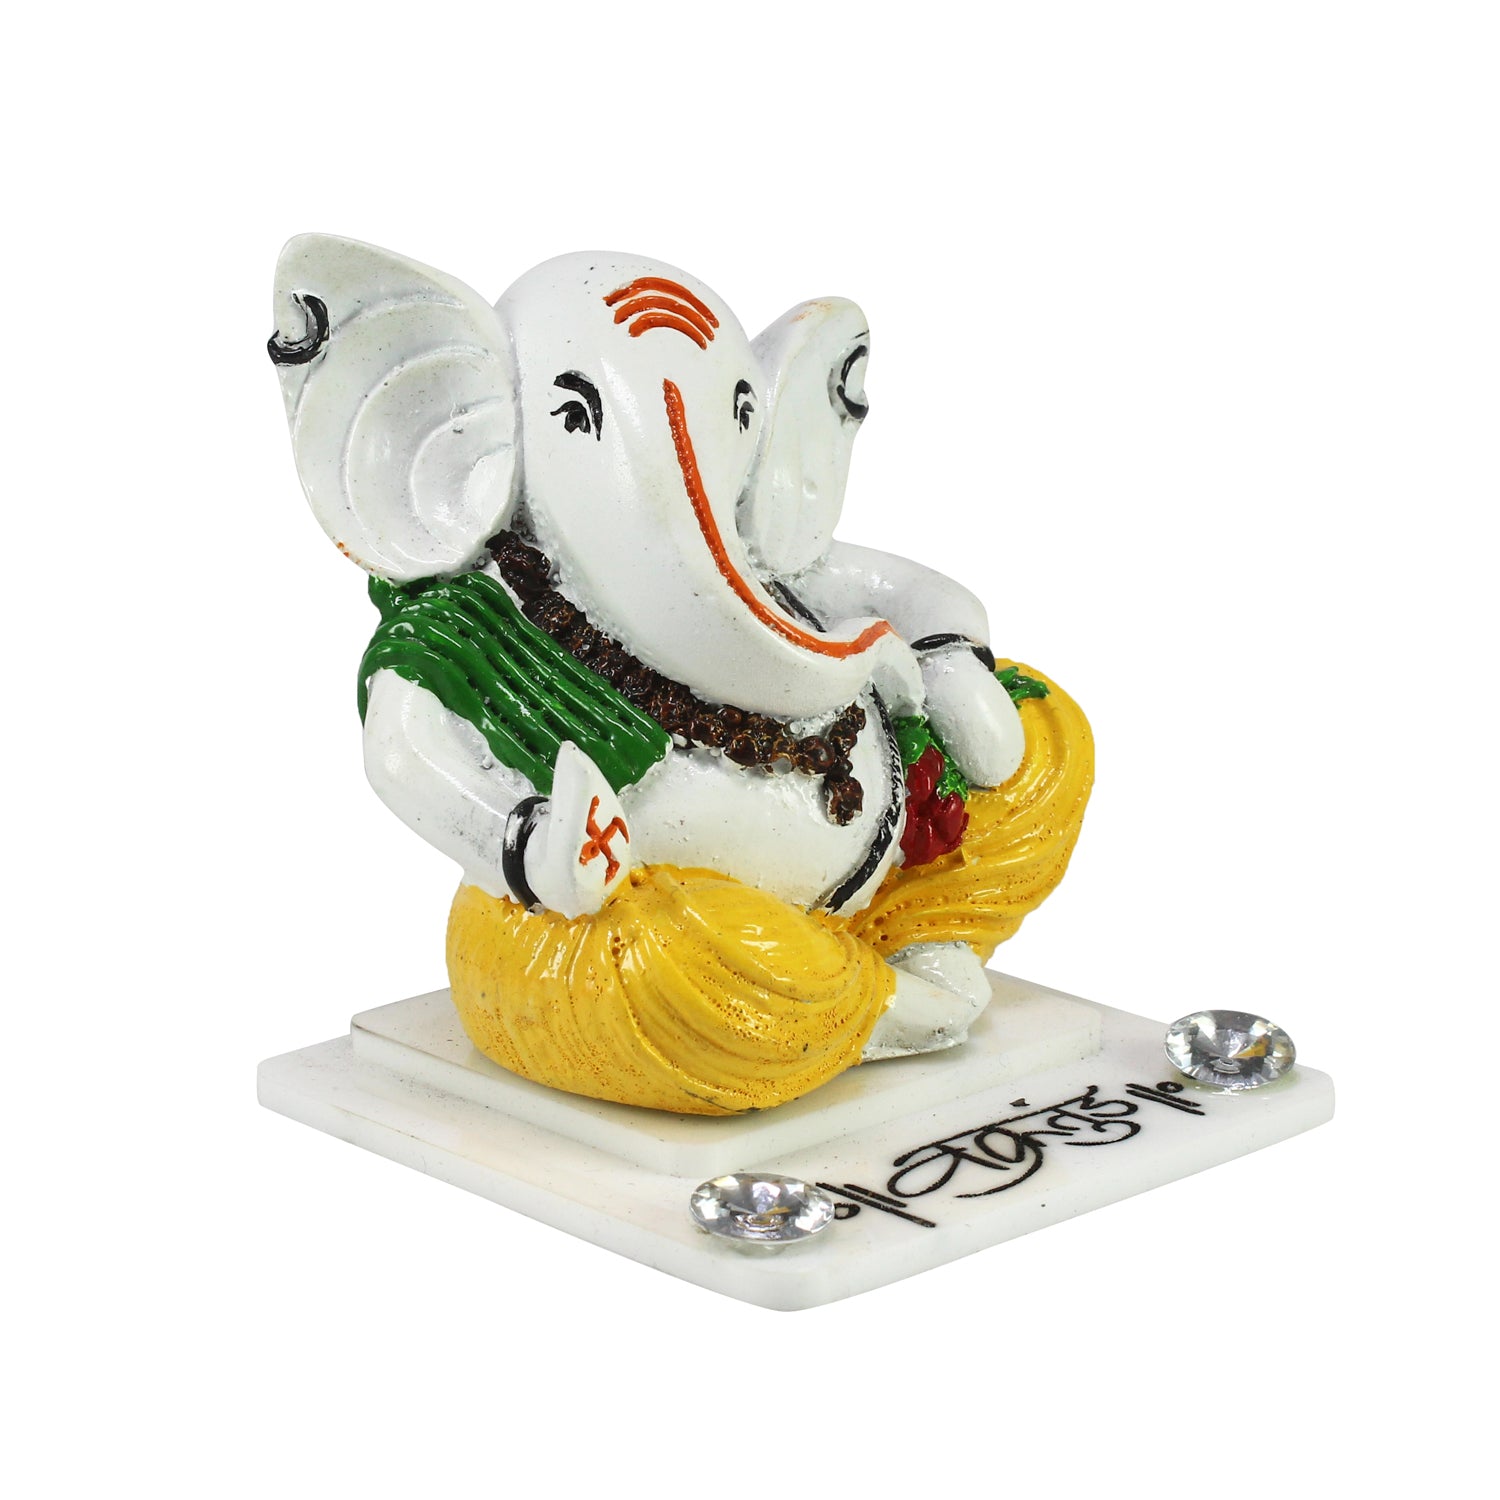 Decorative Lord Ganesha Idol For Car Dashboard, Home Temple, And Office Desks 4